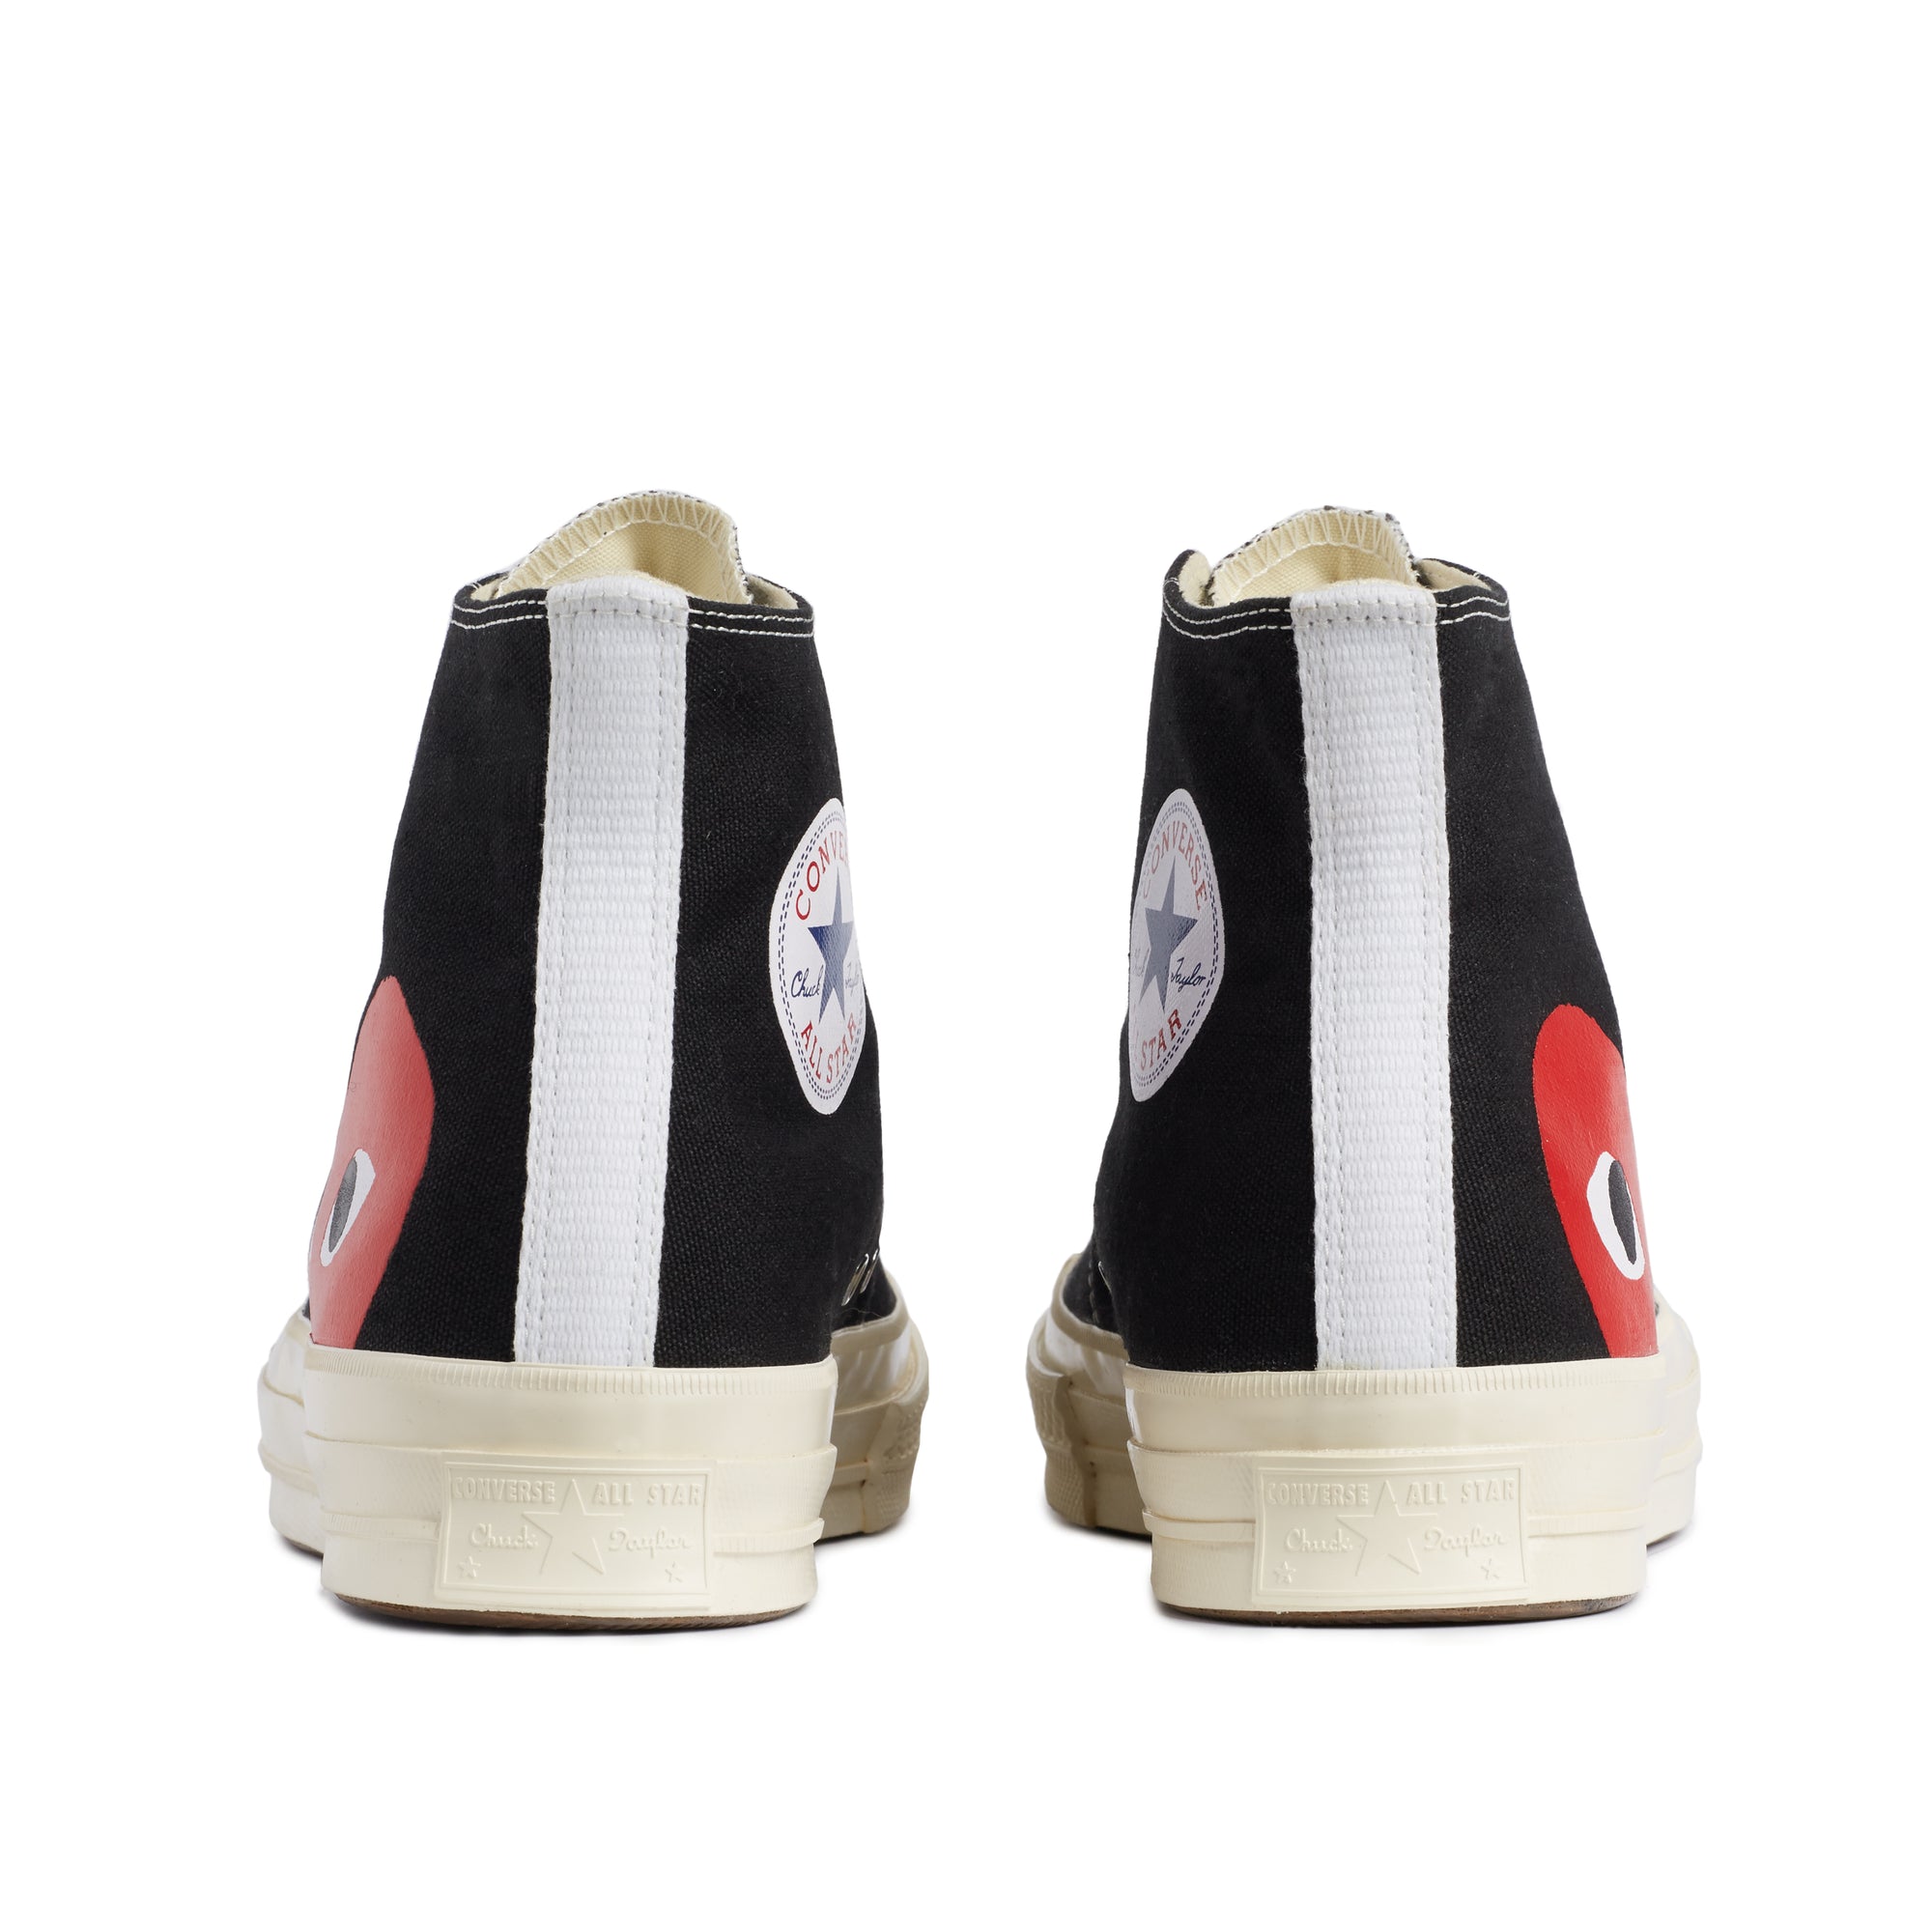 Play Converse - Red Heart Chuck Taylor All Star ’70 High Sneakers - (Black) view 3